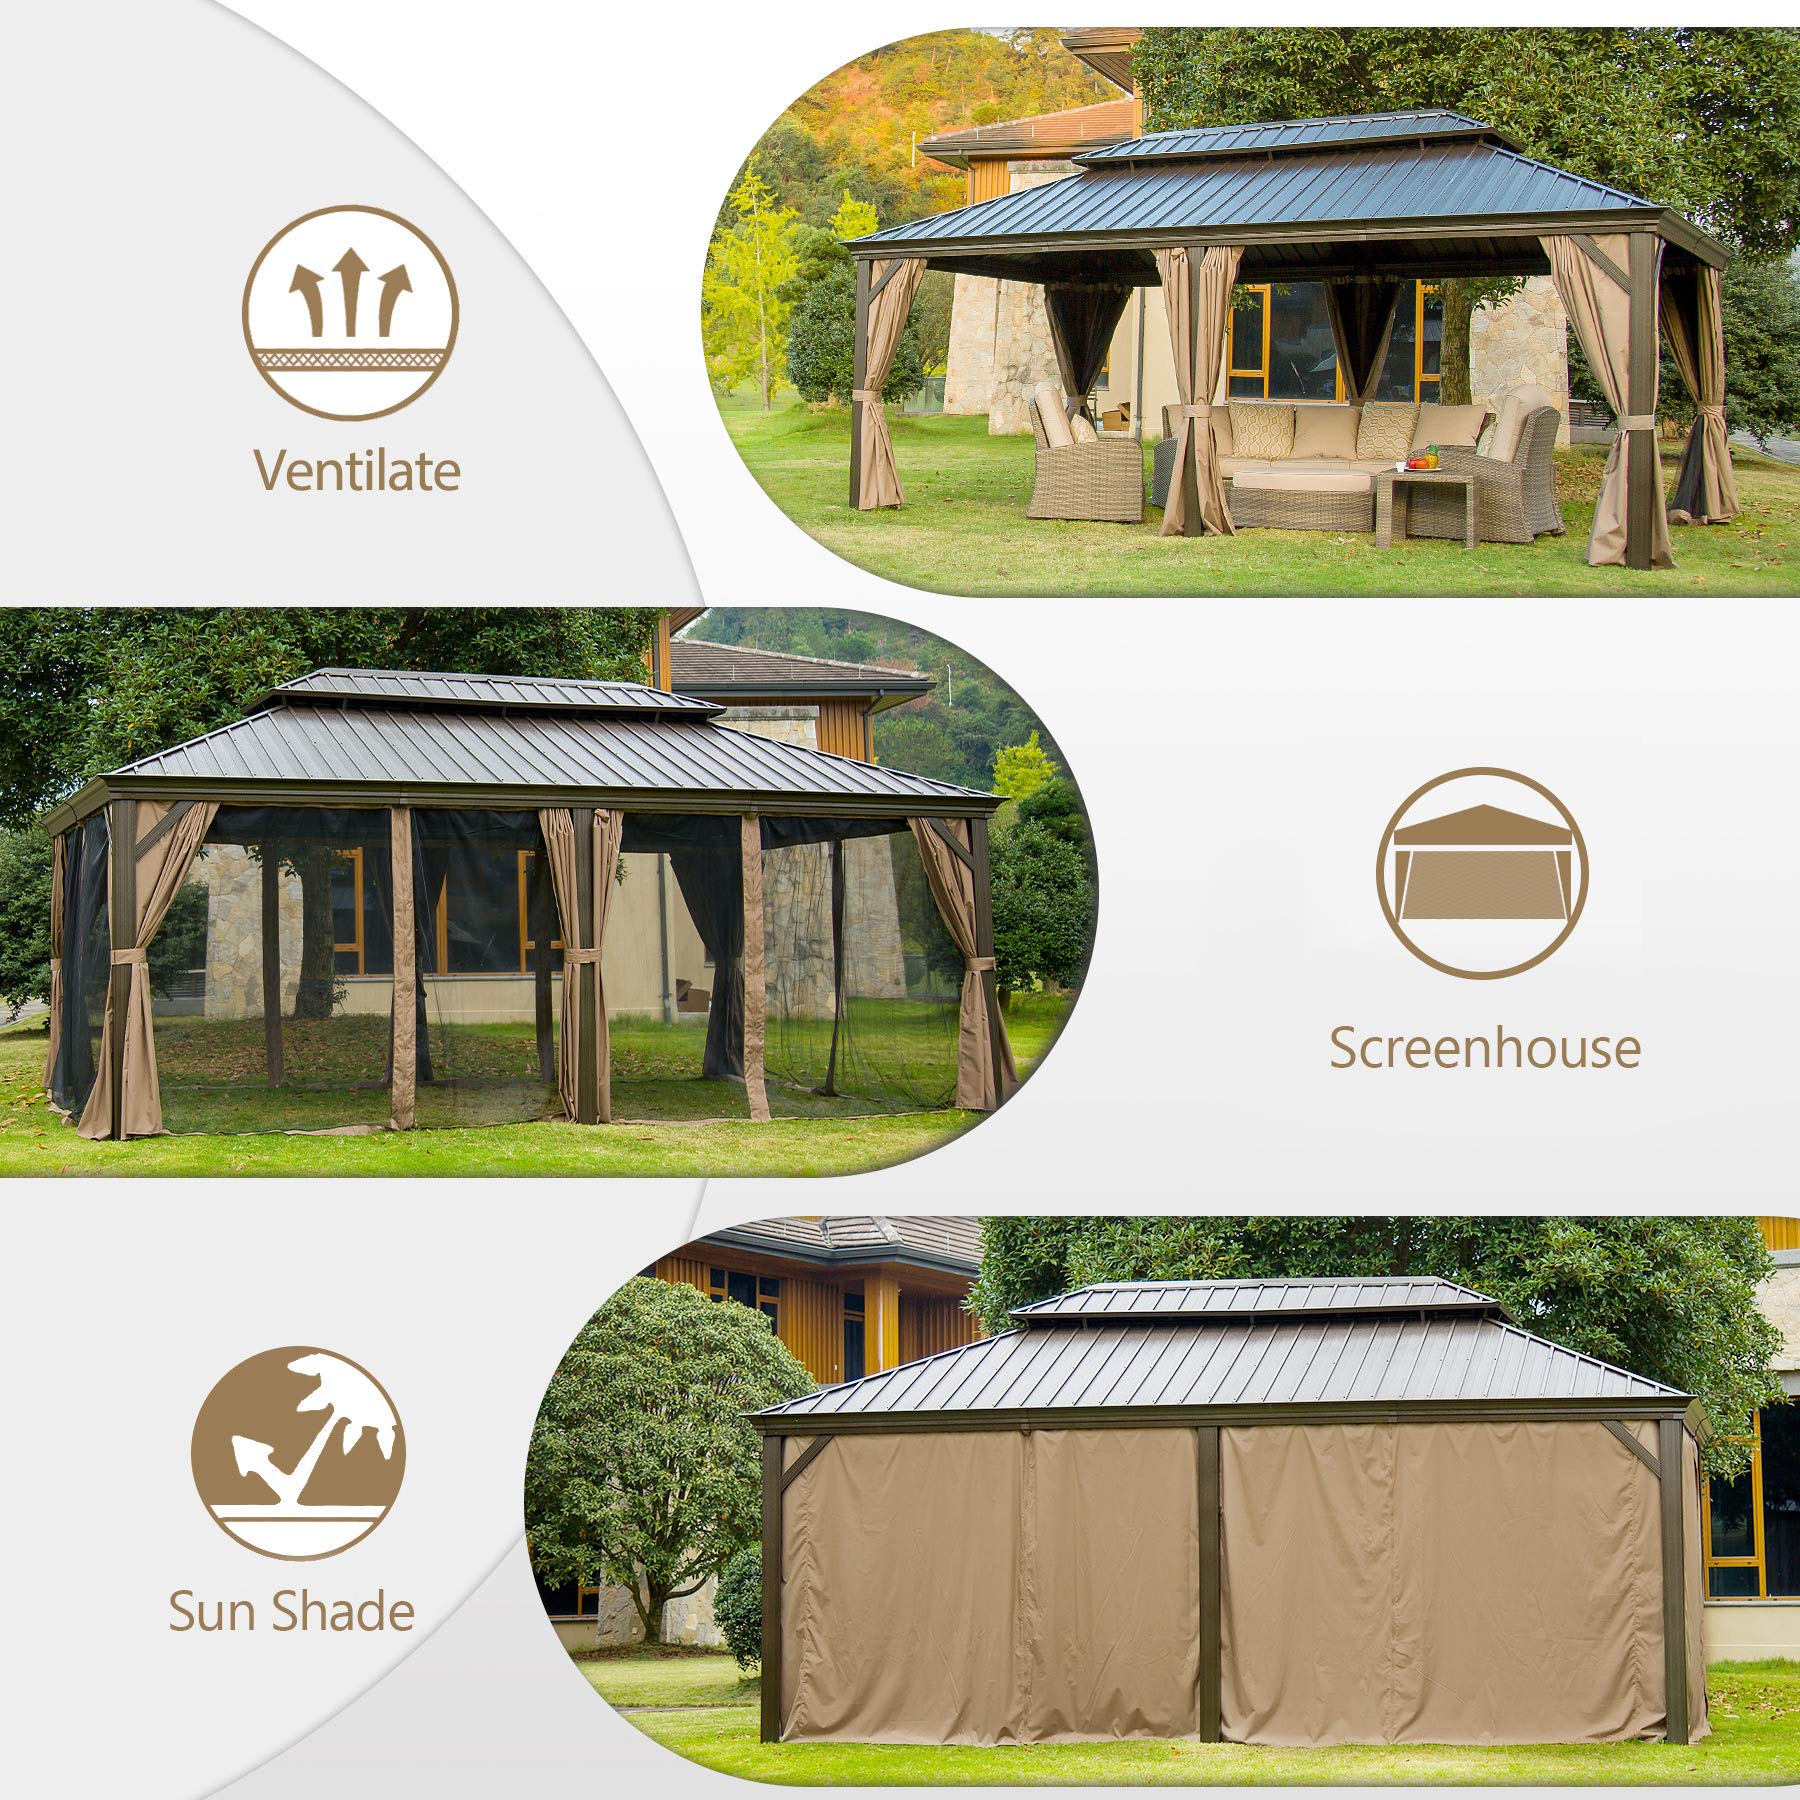 Domi Outdoor Living 12’ X 20’ Hardtop Gazebo, Outdoor Aluminum Frame Canopy with Galvanized Steel Double Roof, Outdoor Permanent Metal Pavilion with Curtains and Netting for Patio, Backyard and Lawn